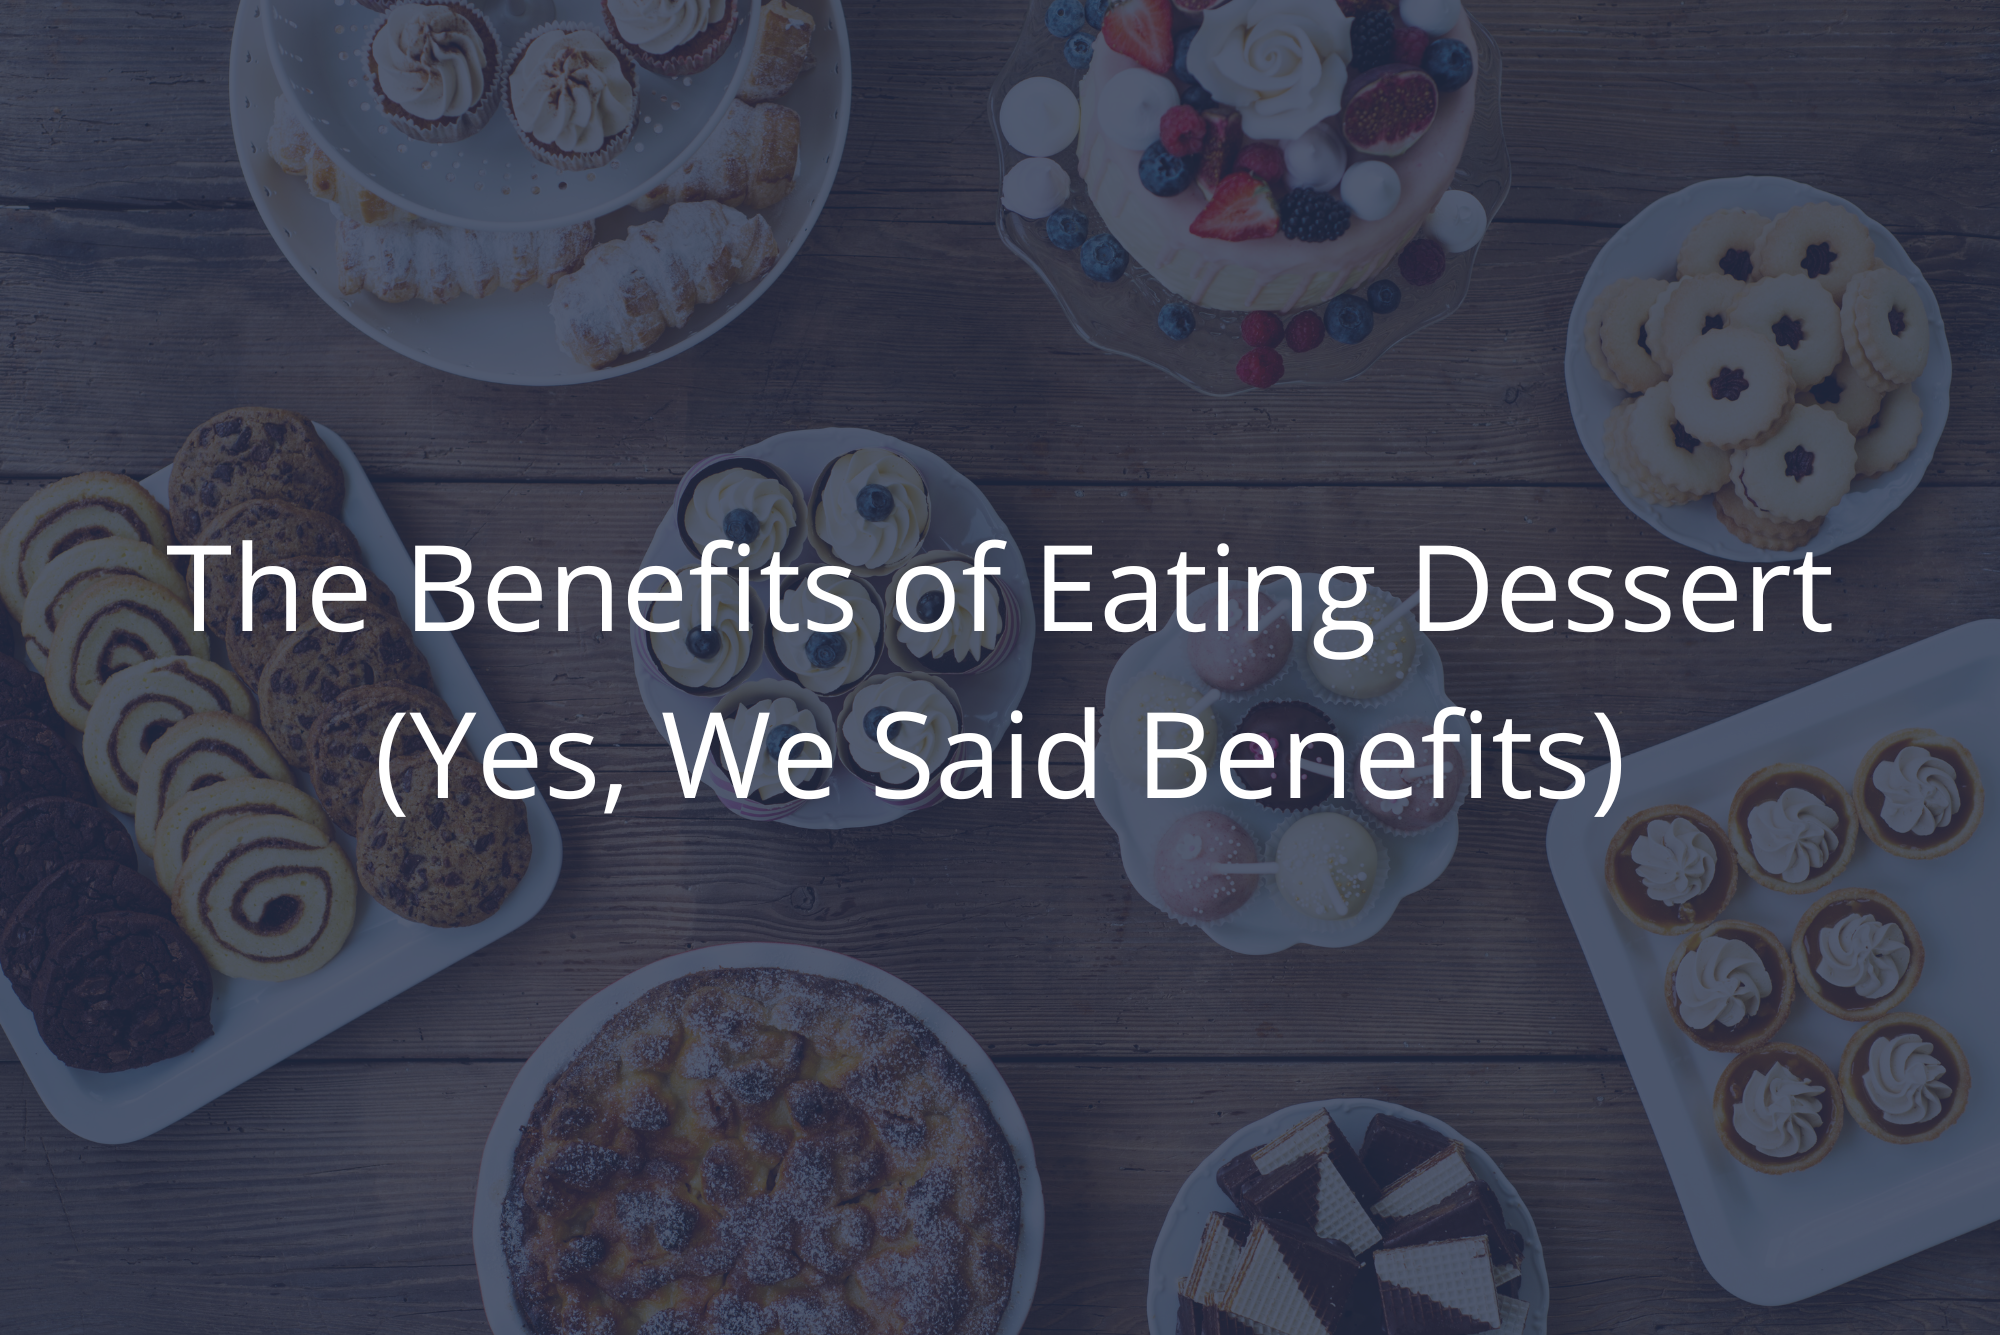 An overhead view of a table full of assorted desserts, representing the benefits of enjoying dessert.